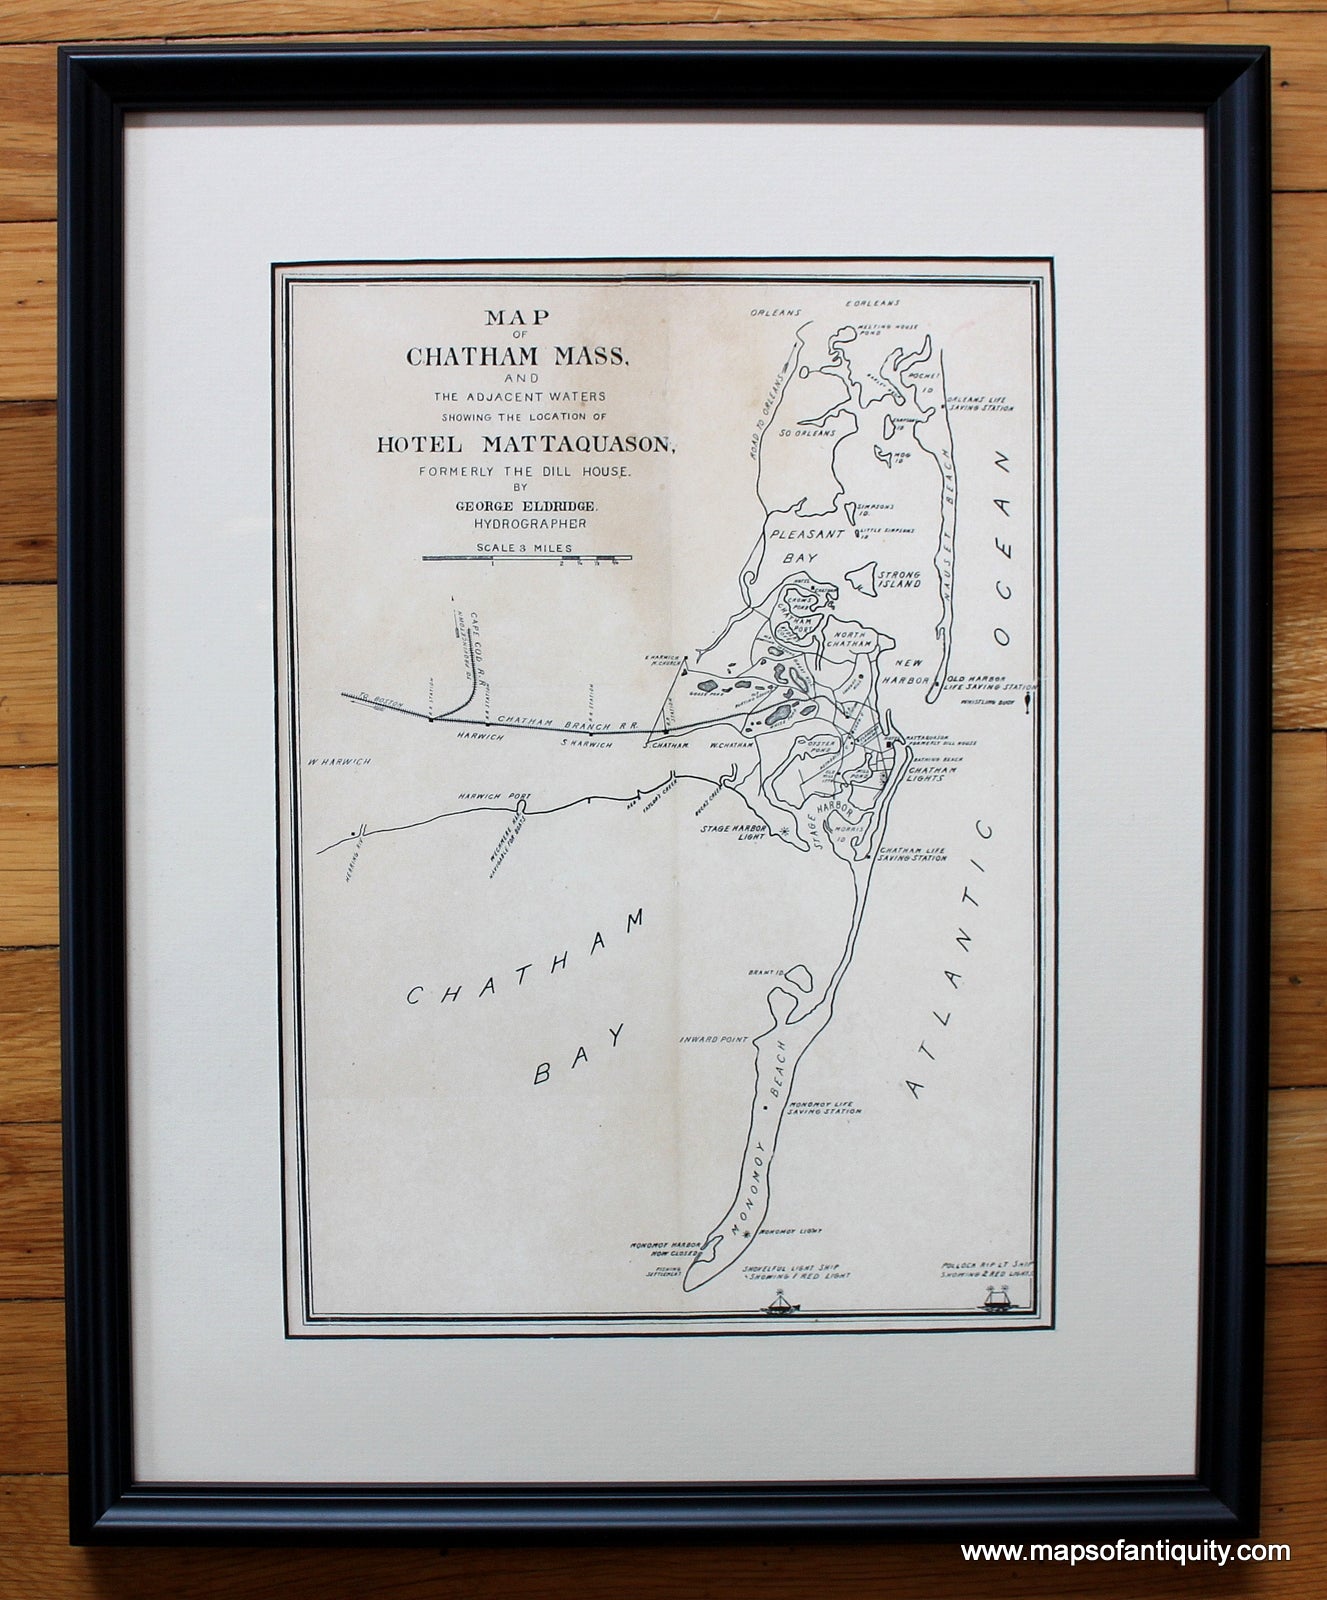 Framed-Reproduction-Framed-Black-and-White-Map-Print-of-Chatham-Mass---Reproduction-Gift--Reproduction-Framed--Maps-Of-Antiquity